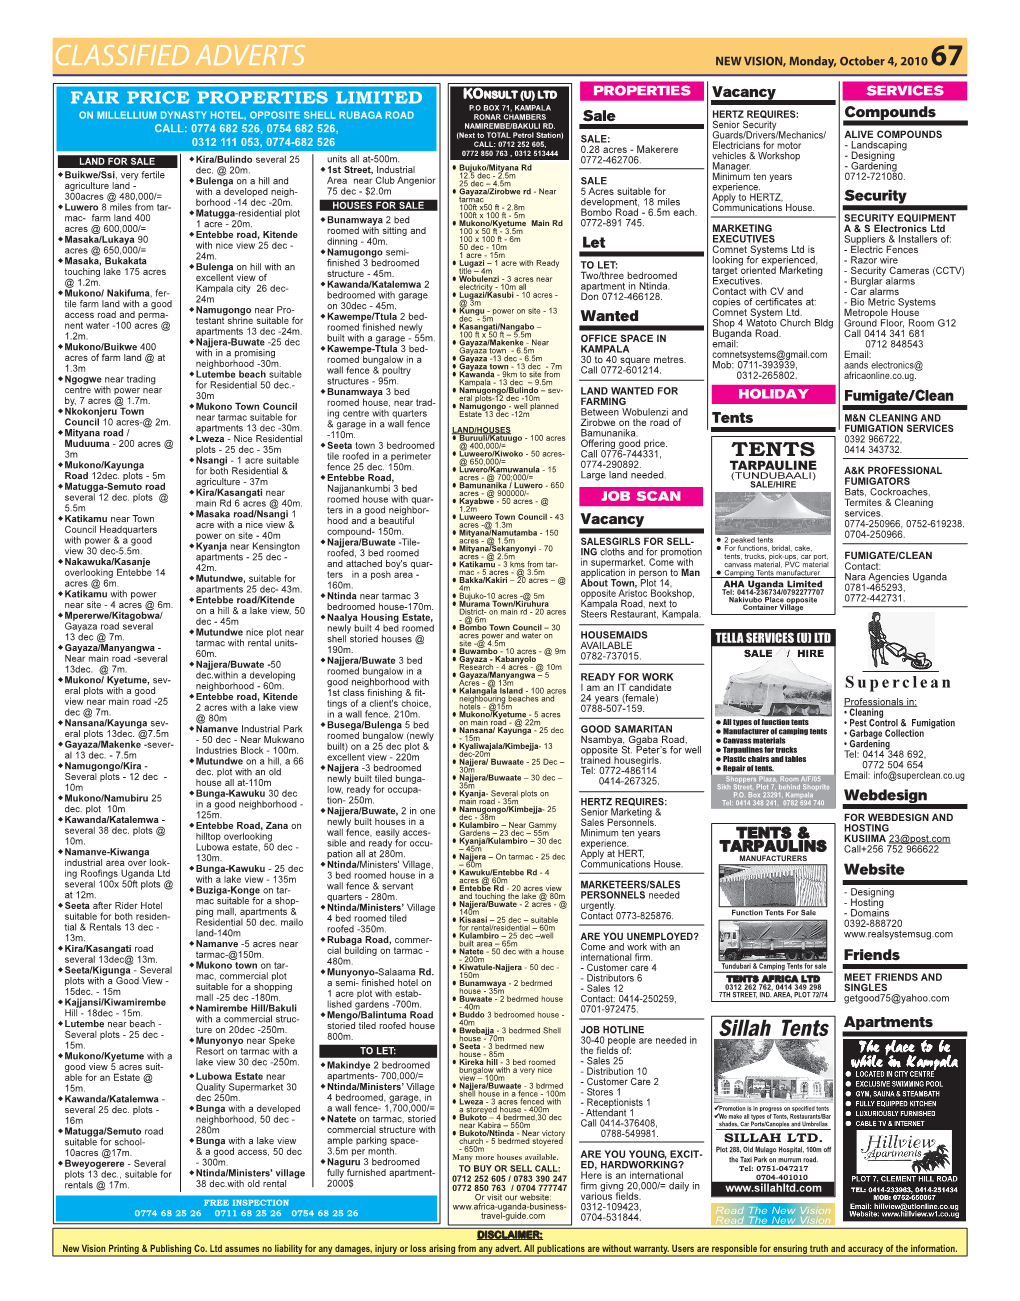 CLASSIFIED ADVERTS NEW VISION, Monday, October 4, 2010 67